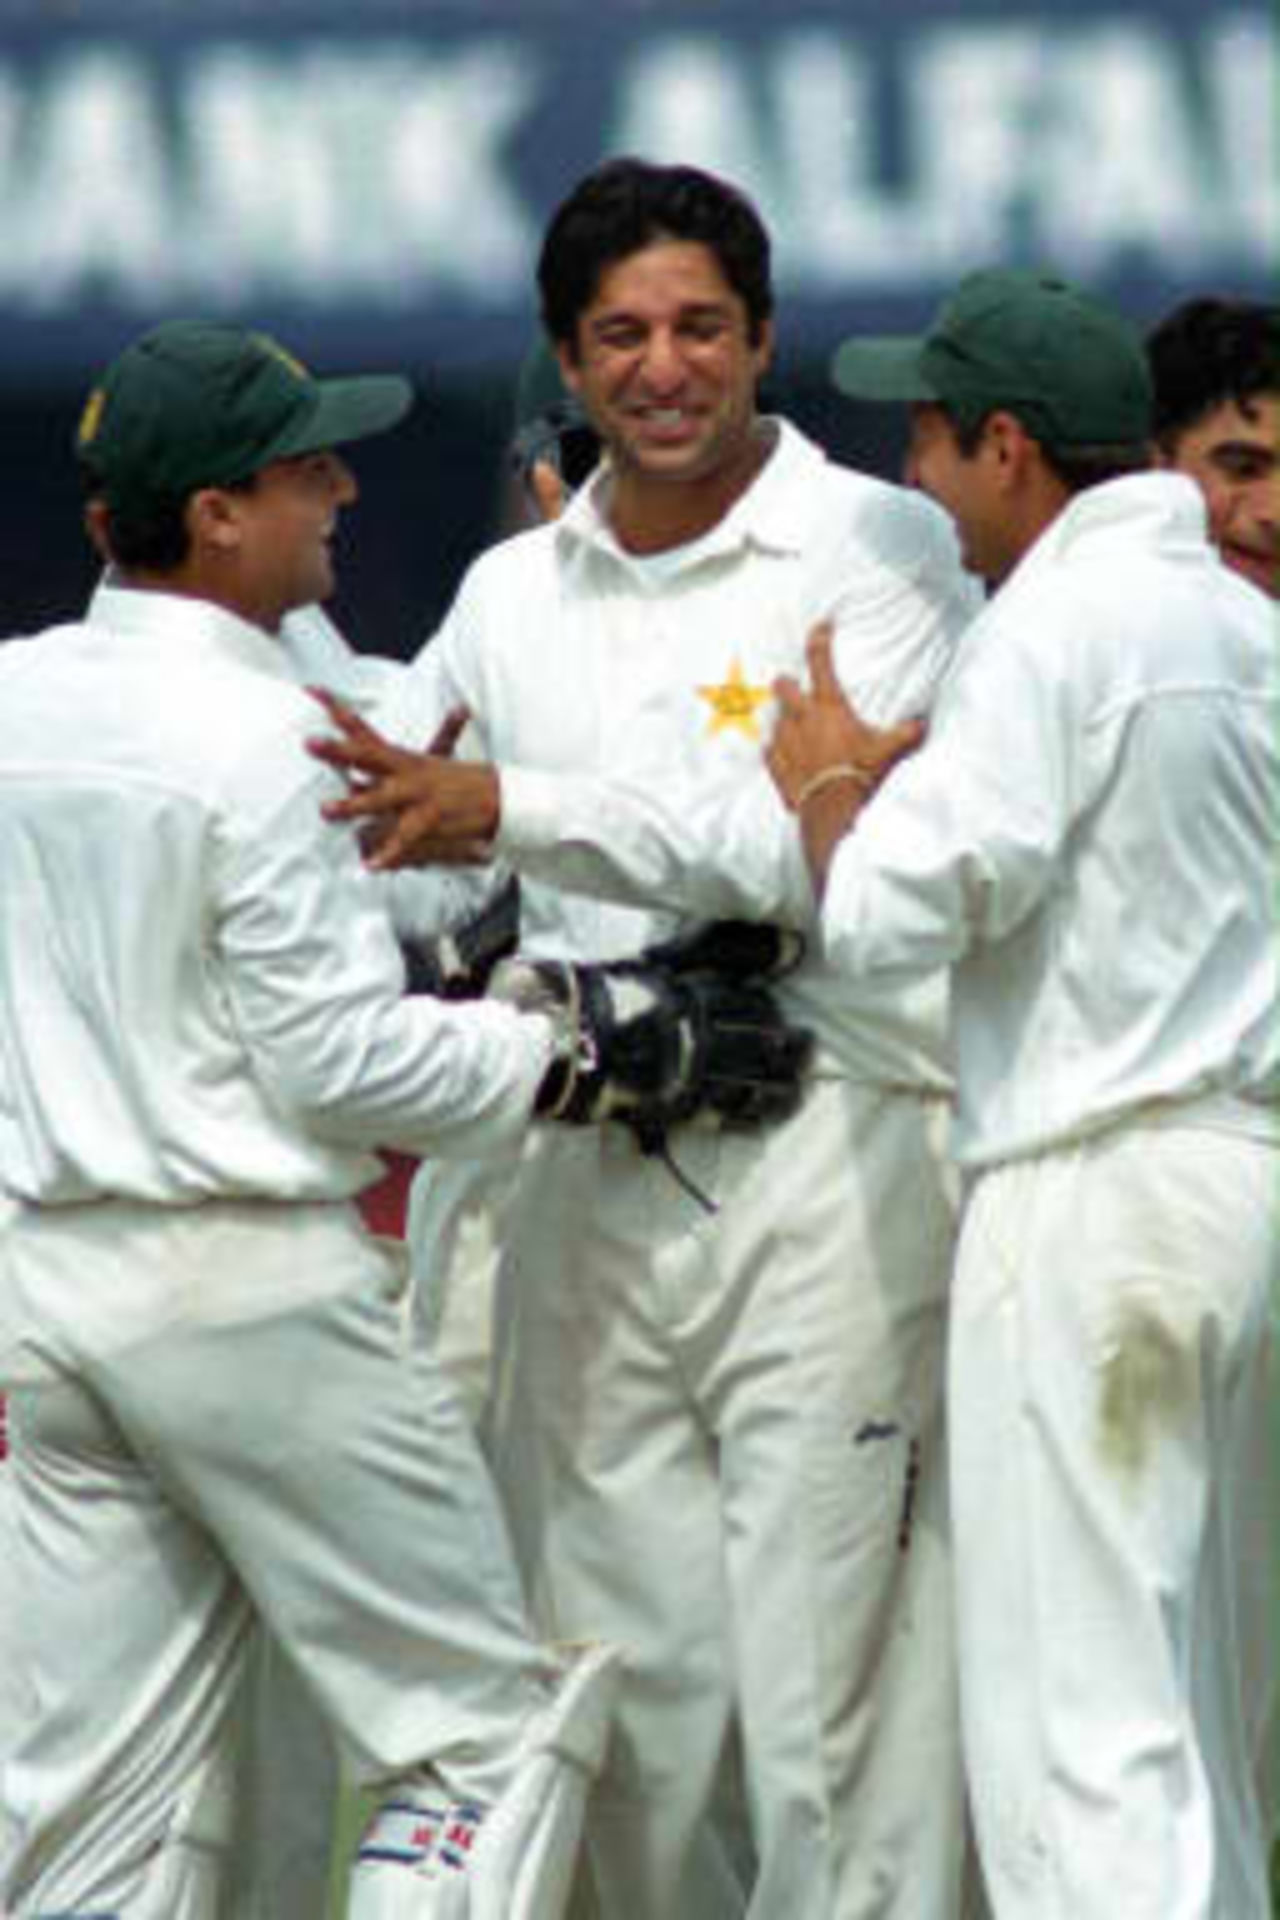 Wasim Akram is congratulated by the team after his hat-trick - Asian Test Championship, 1998/99, 3rd Match, Pakistan v Sri Lanka, Gadaffi Stadium, Lahore, 6 March 1999